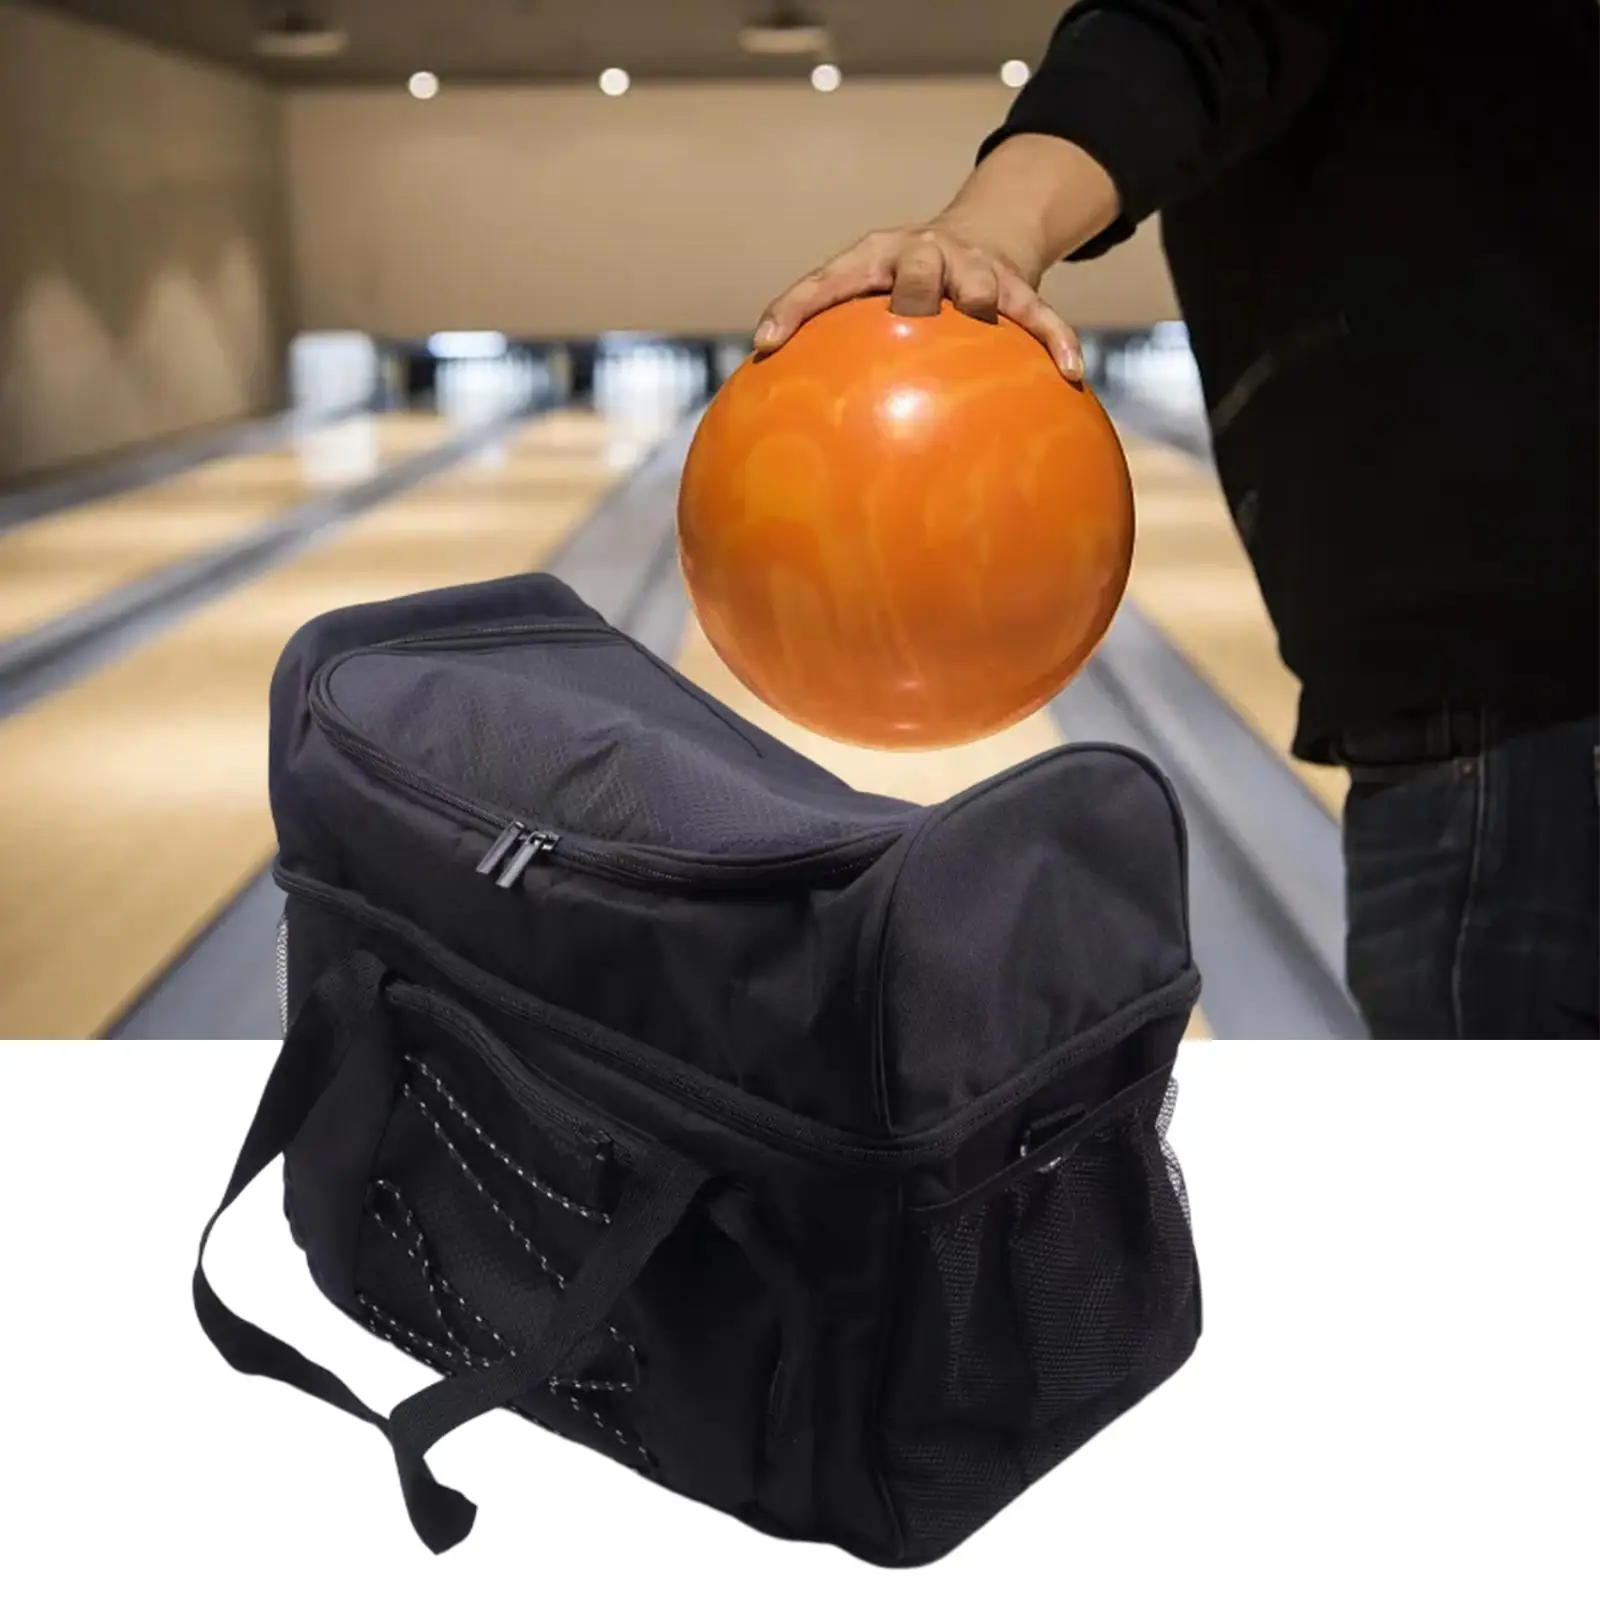 Bowling Bag for Two Balls Handbag Storage Pocket Nylon Durable Bowling Tote Bag Carrier Fits Bowling Shoes up to Mens Size 16